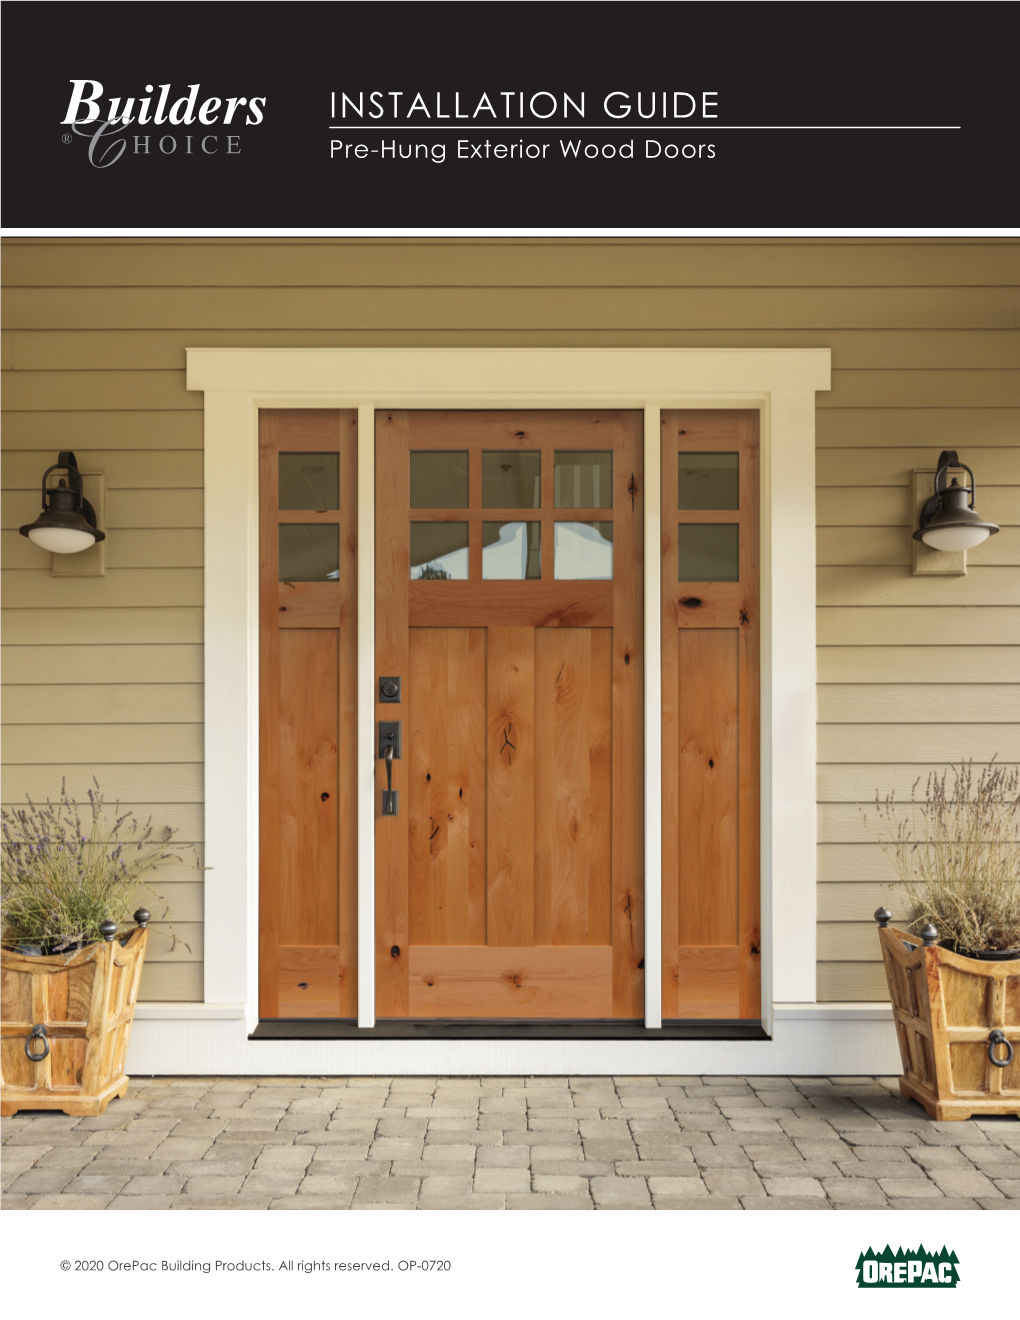 Builders Choice Exterior Wood Pre-Hung Door Installation Guide